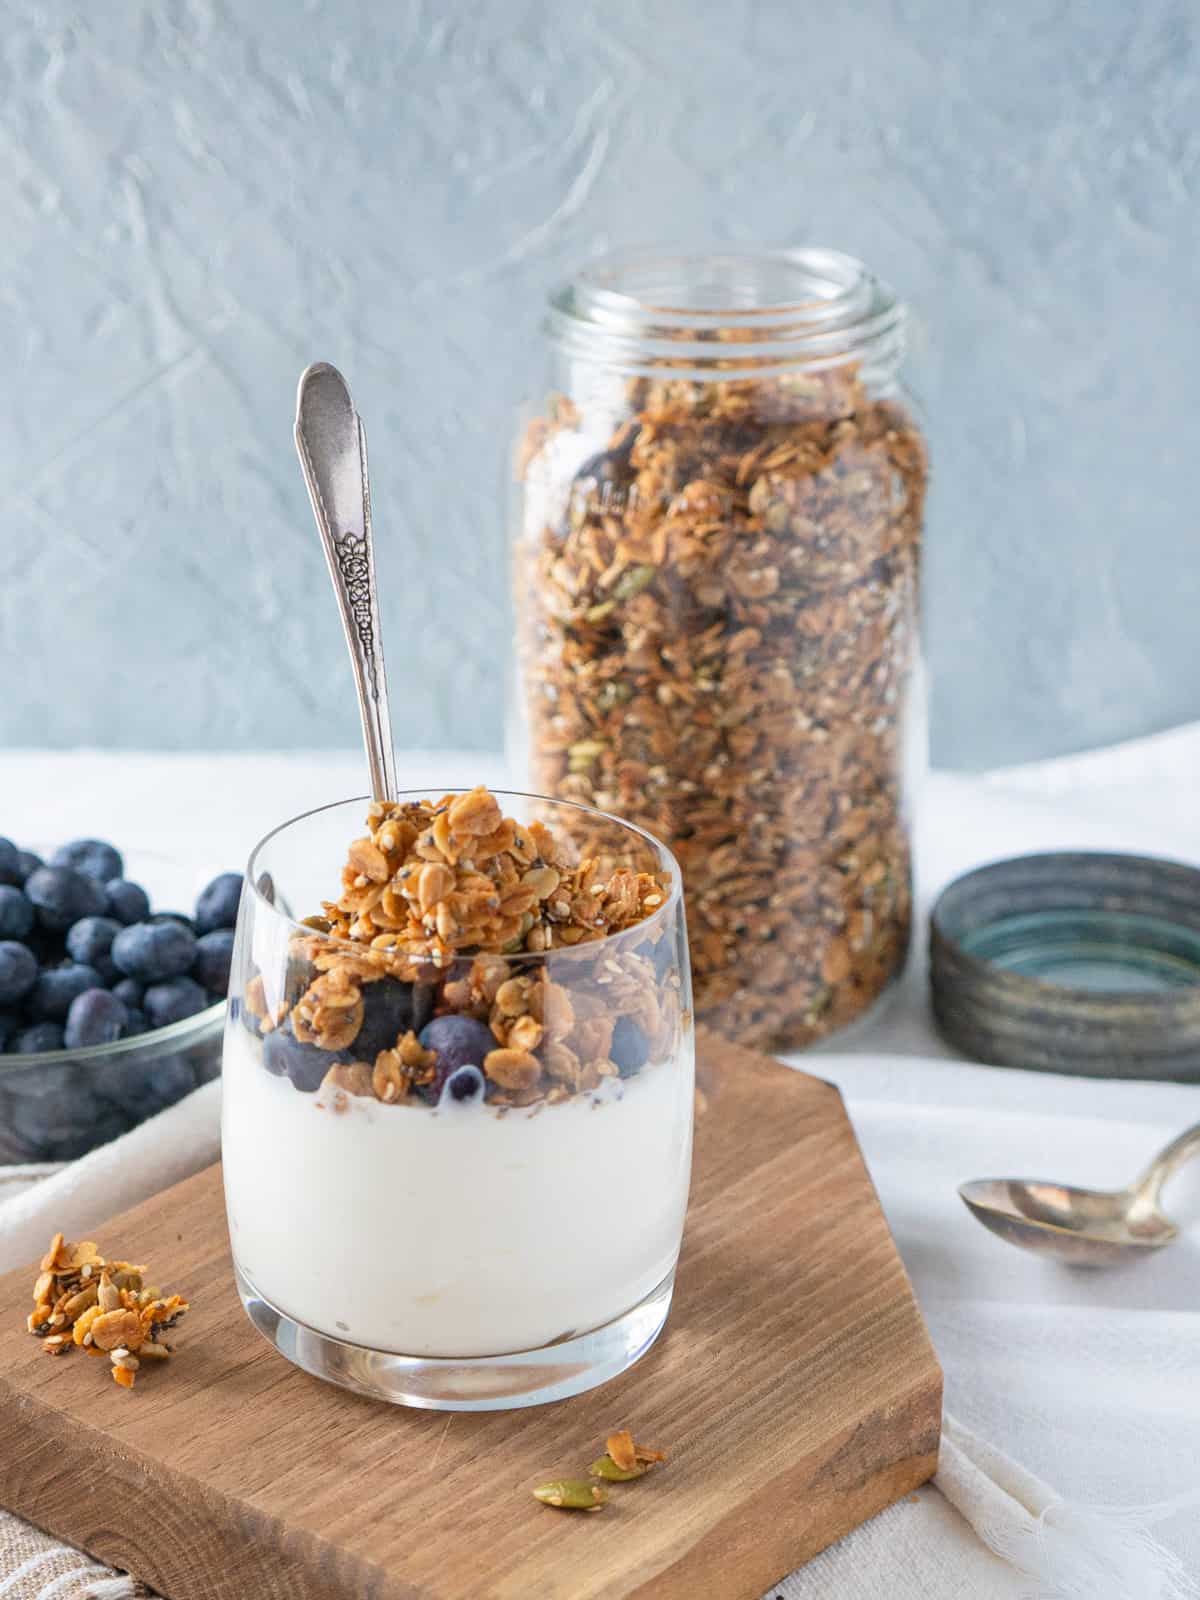 Yogurt in a glass topped with blueberries and granola. Jar of granola and dish of blueberries on the side. 